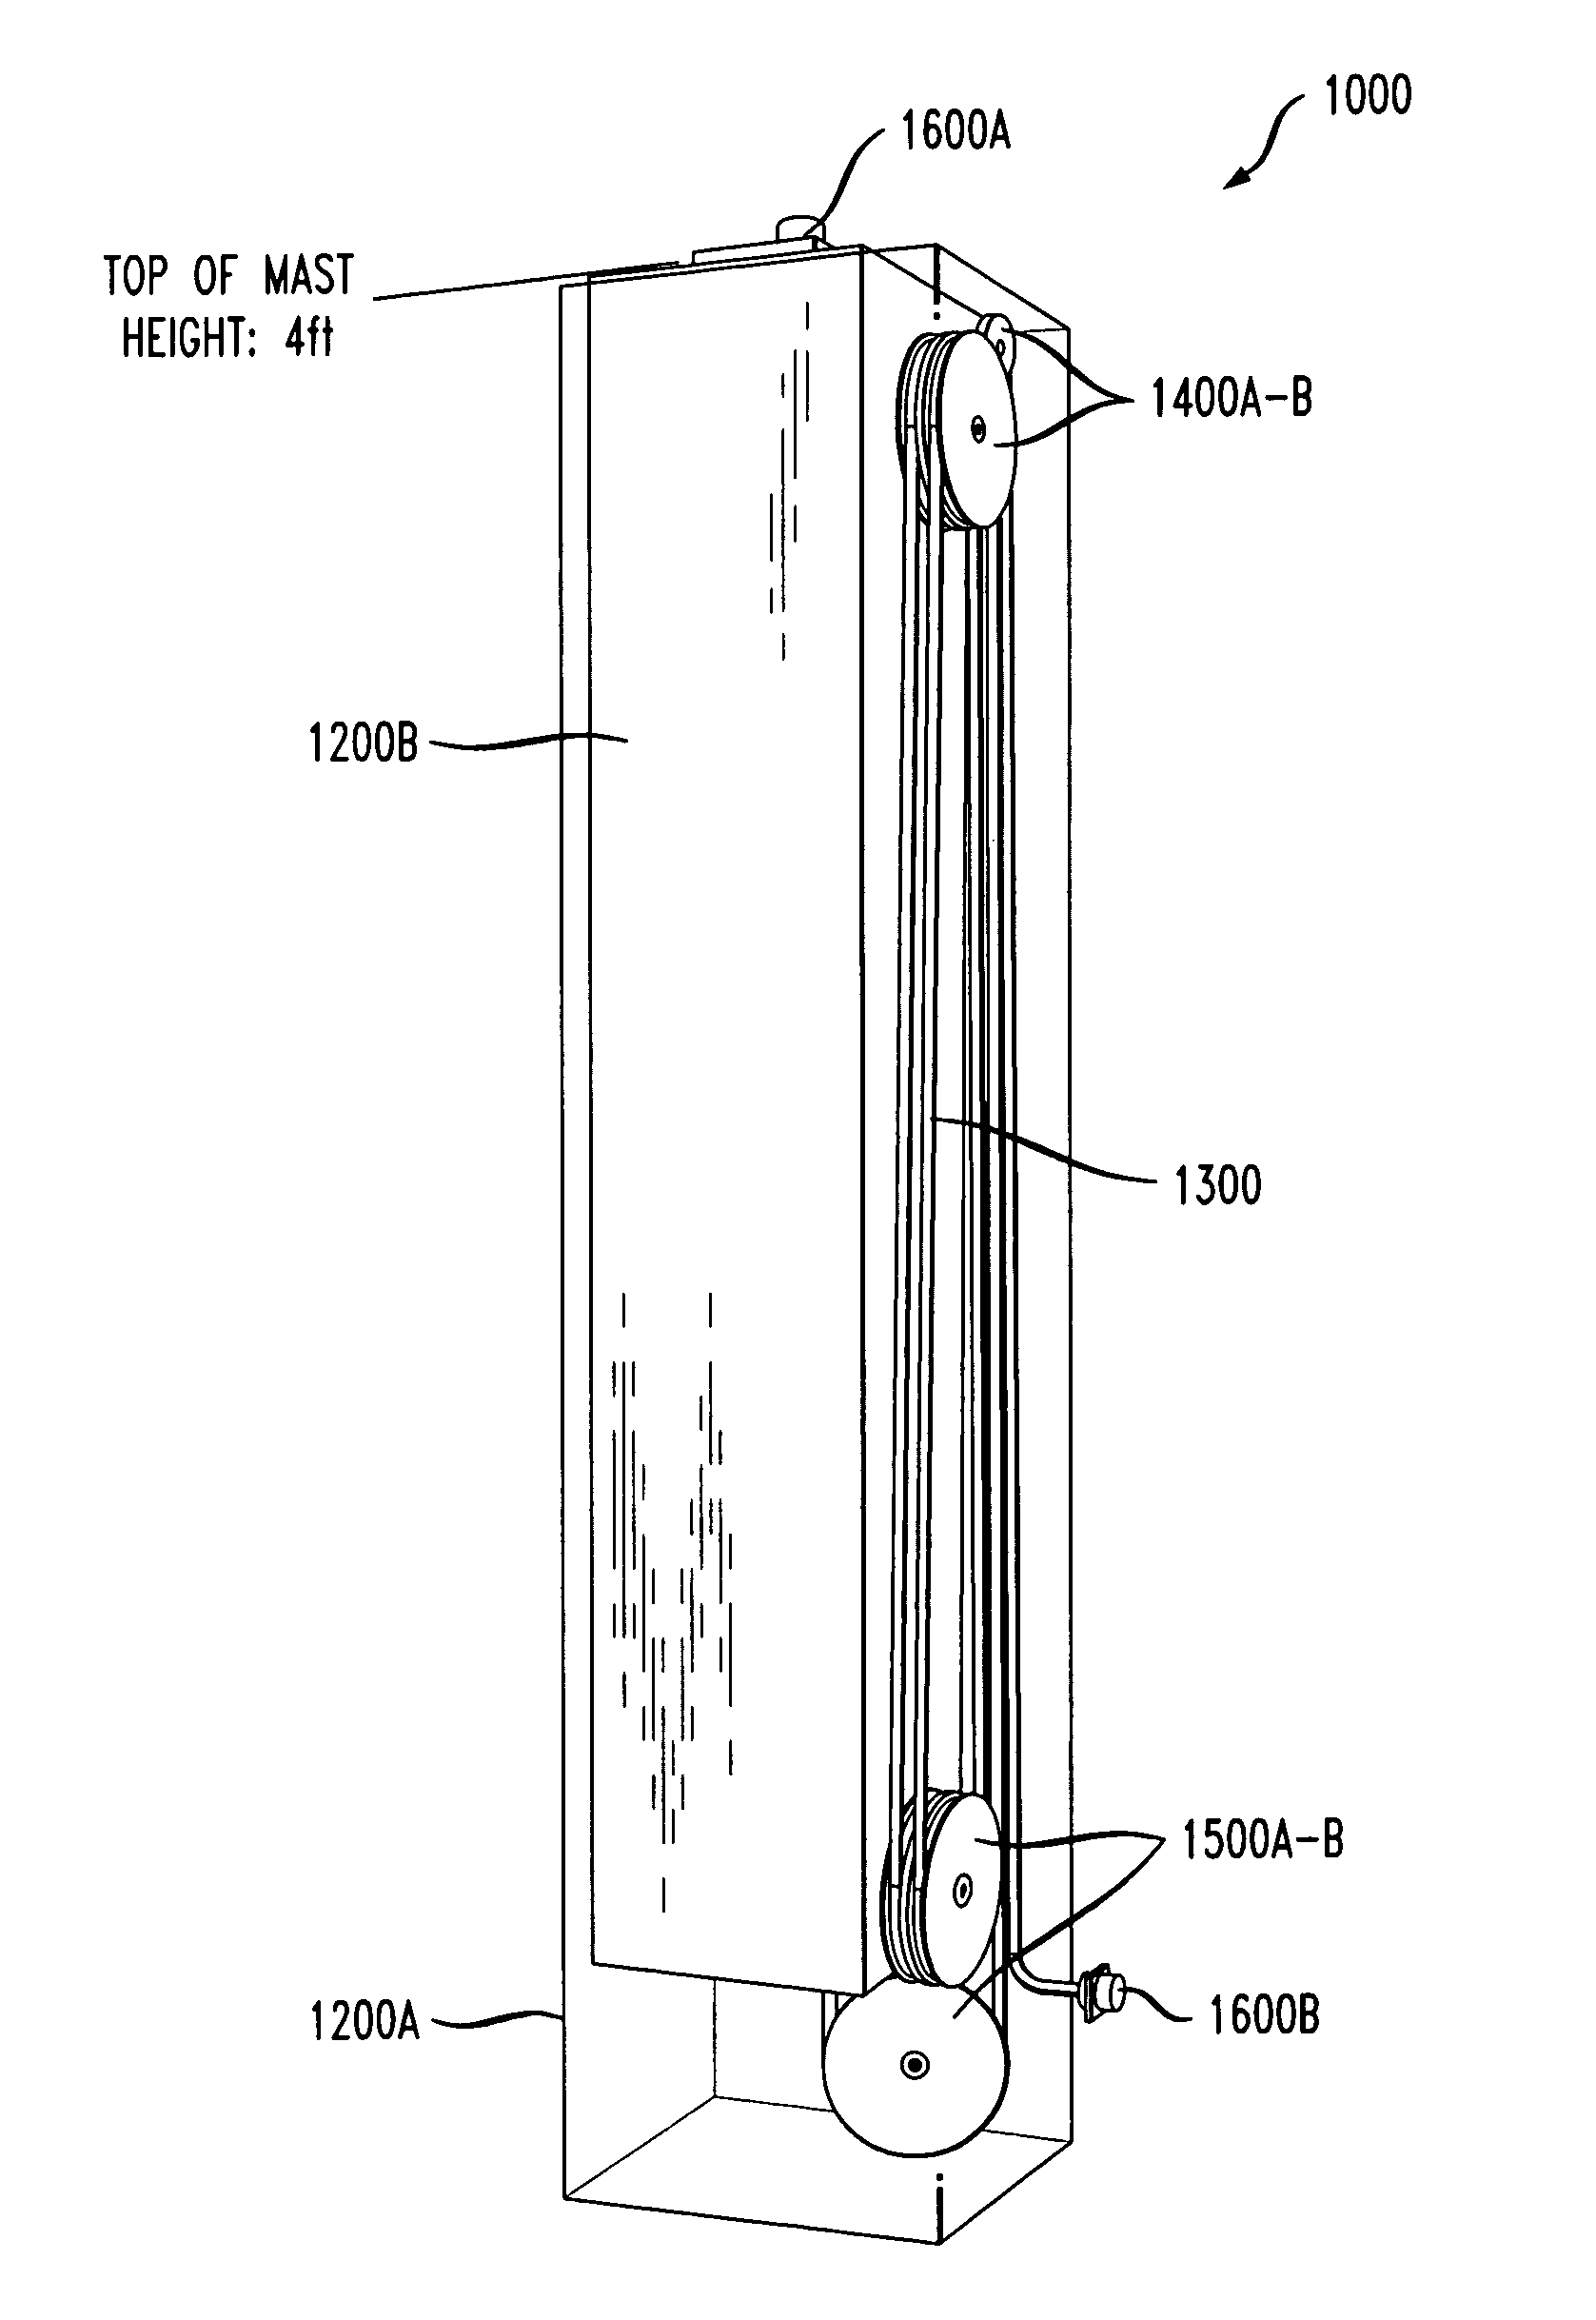 Telescoping mast cable storage system